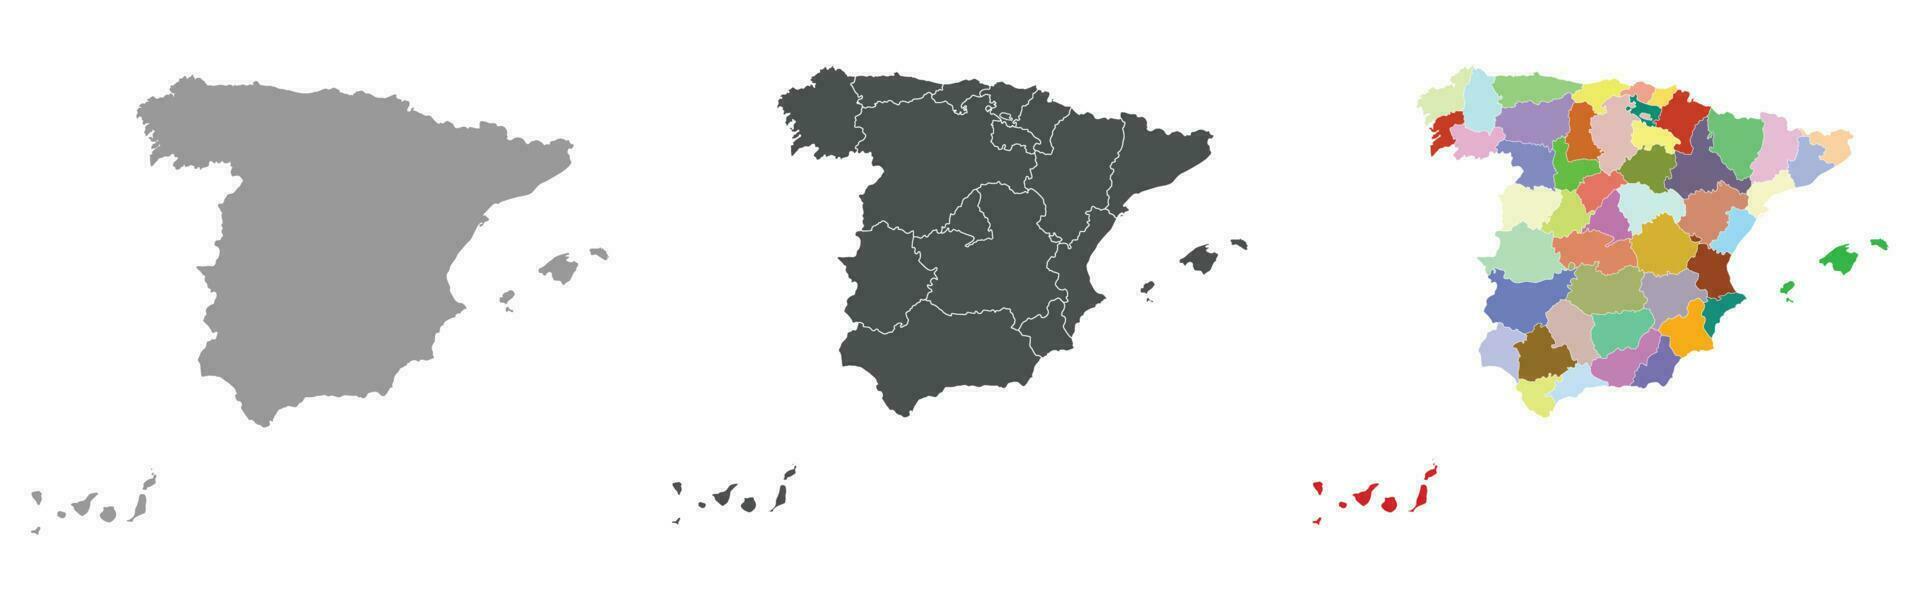 Spain map set on colored and grey vector